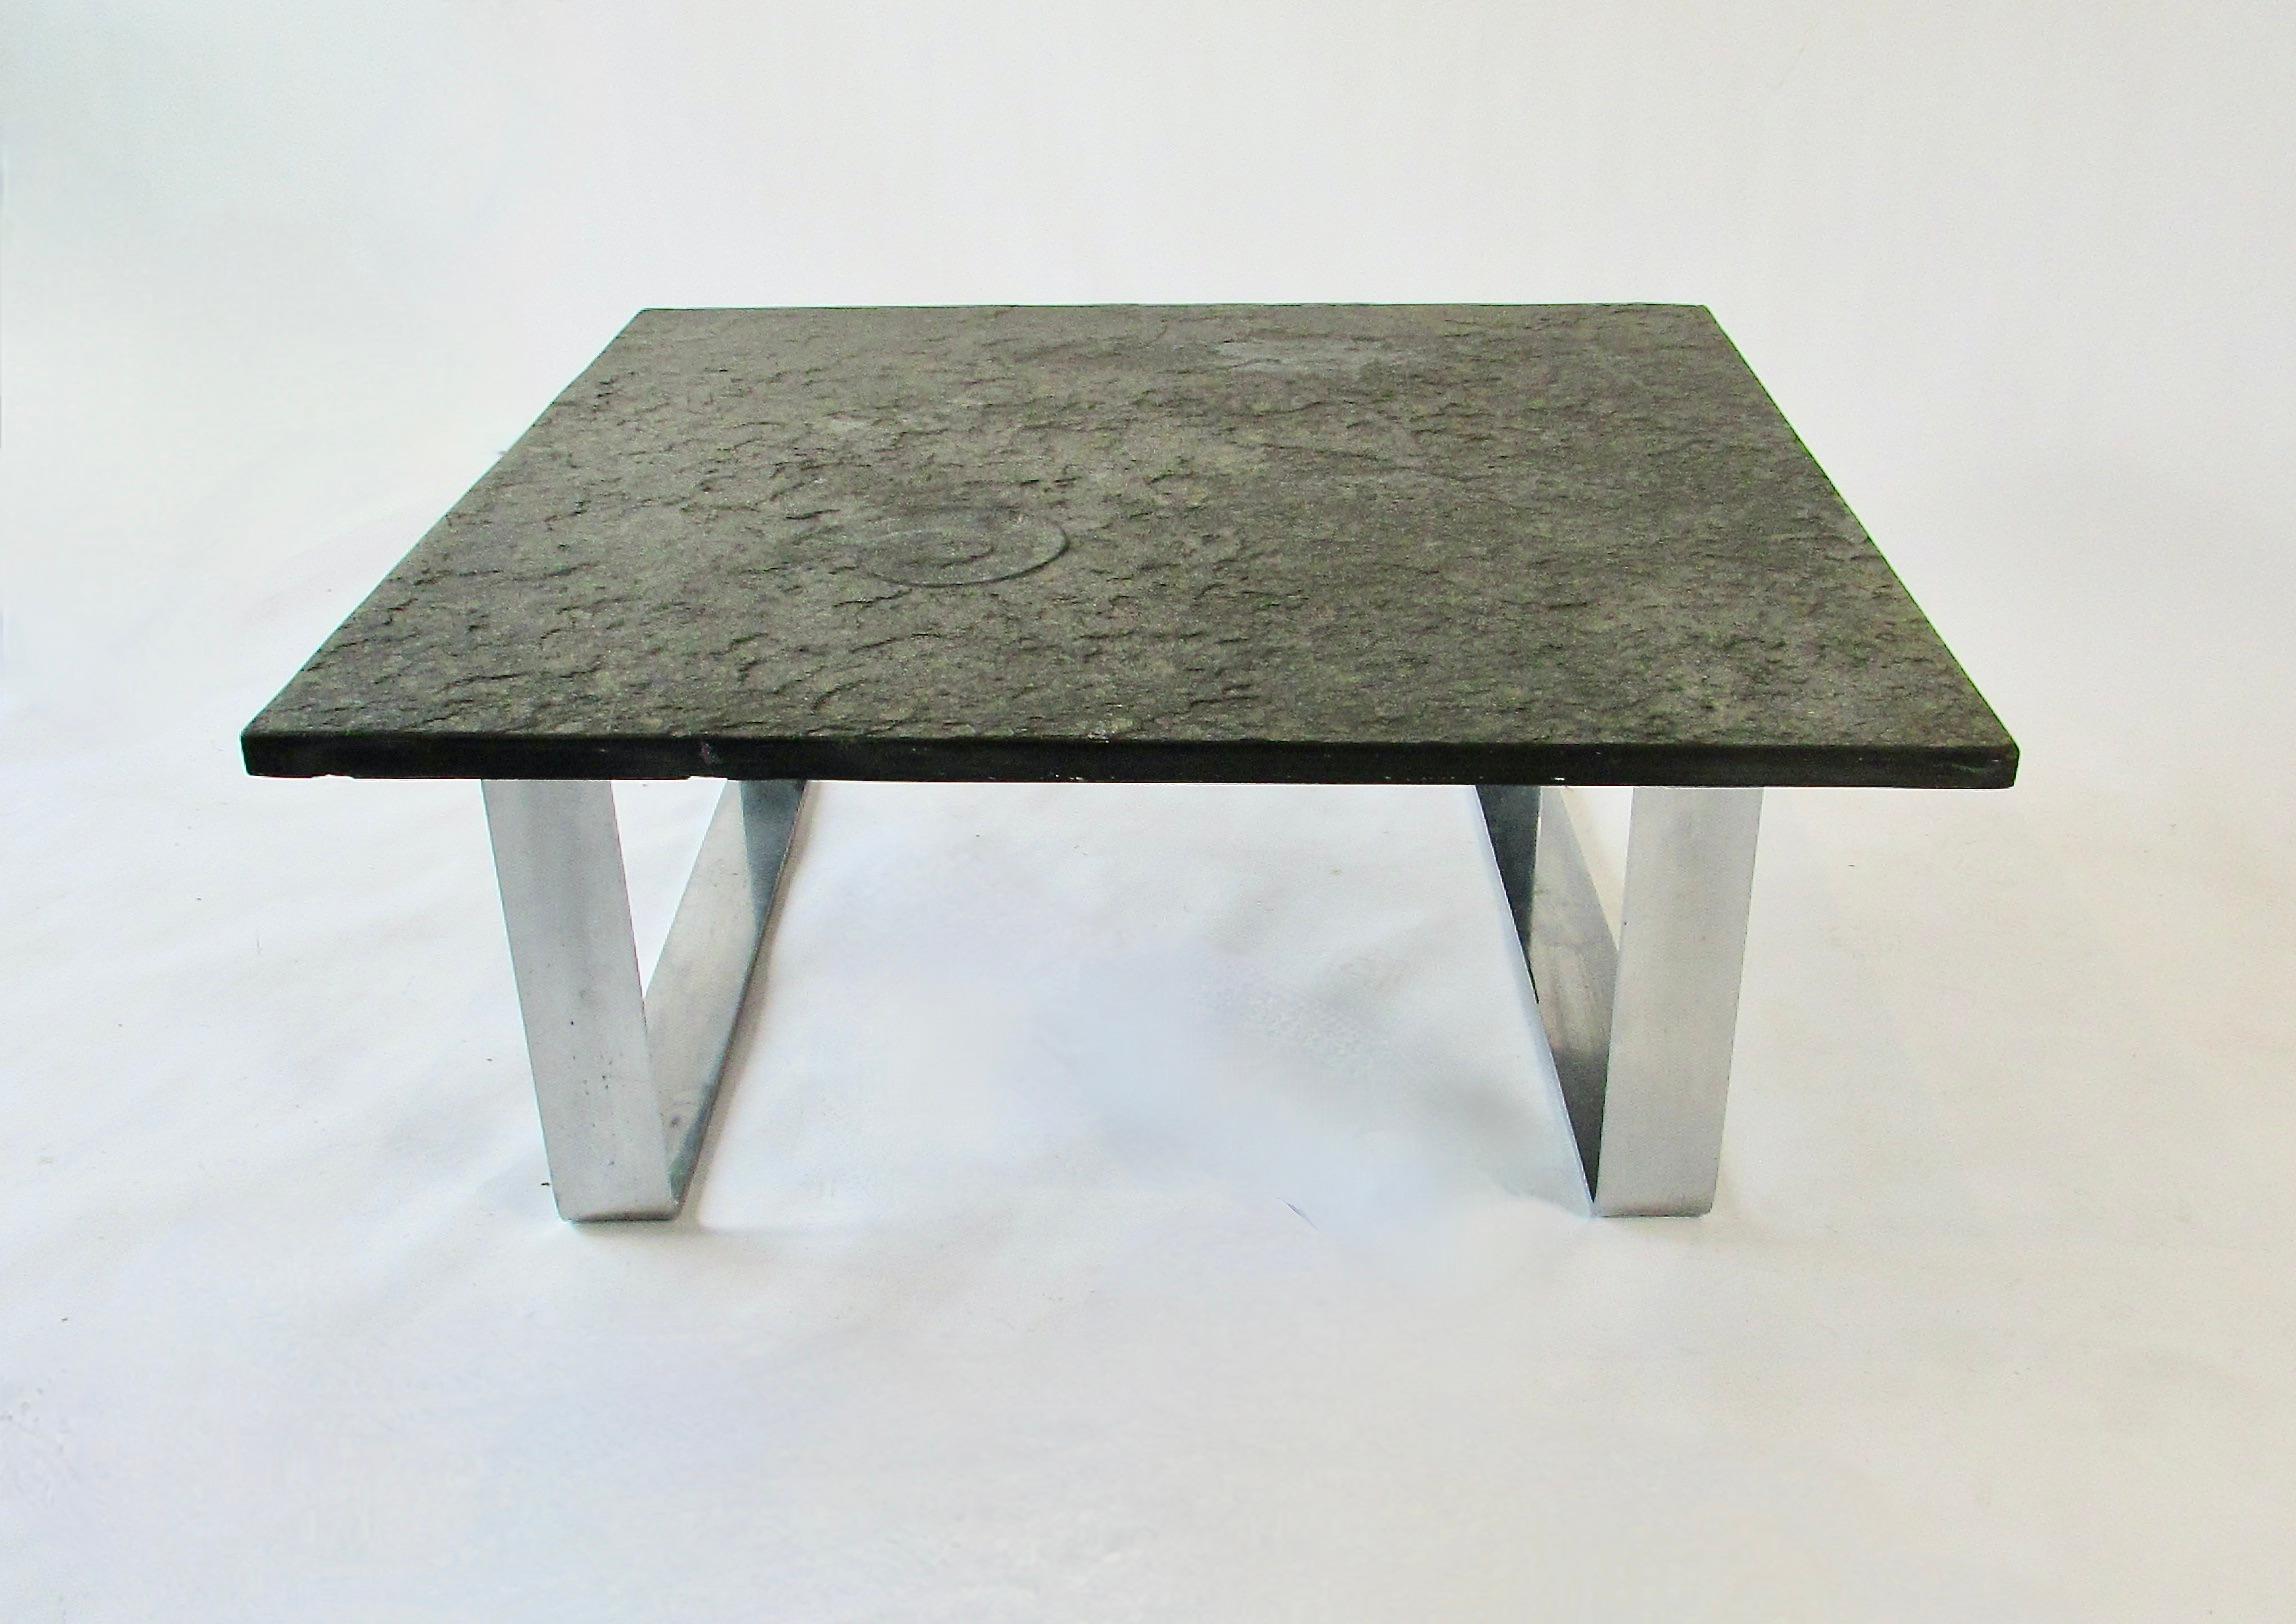 Thick slate top table with Ammonite fossil on chrome base For Sale 4